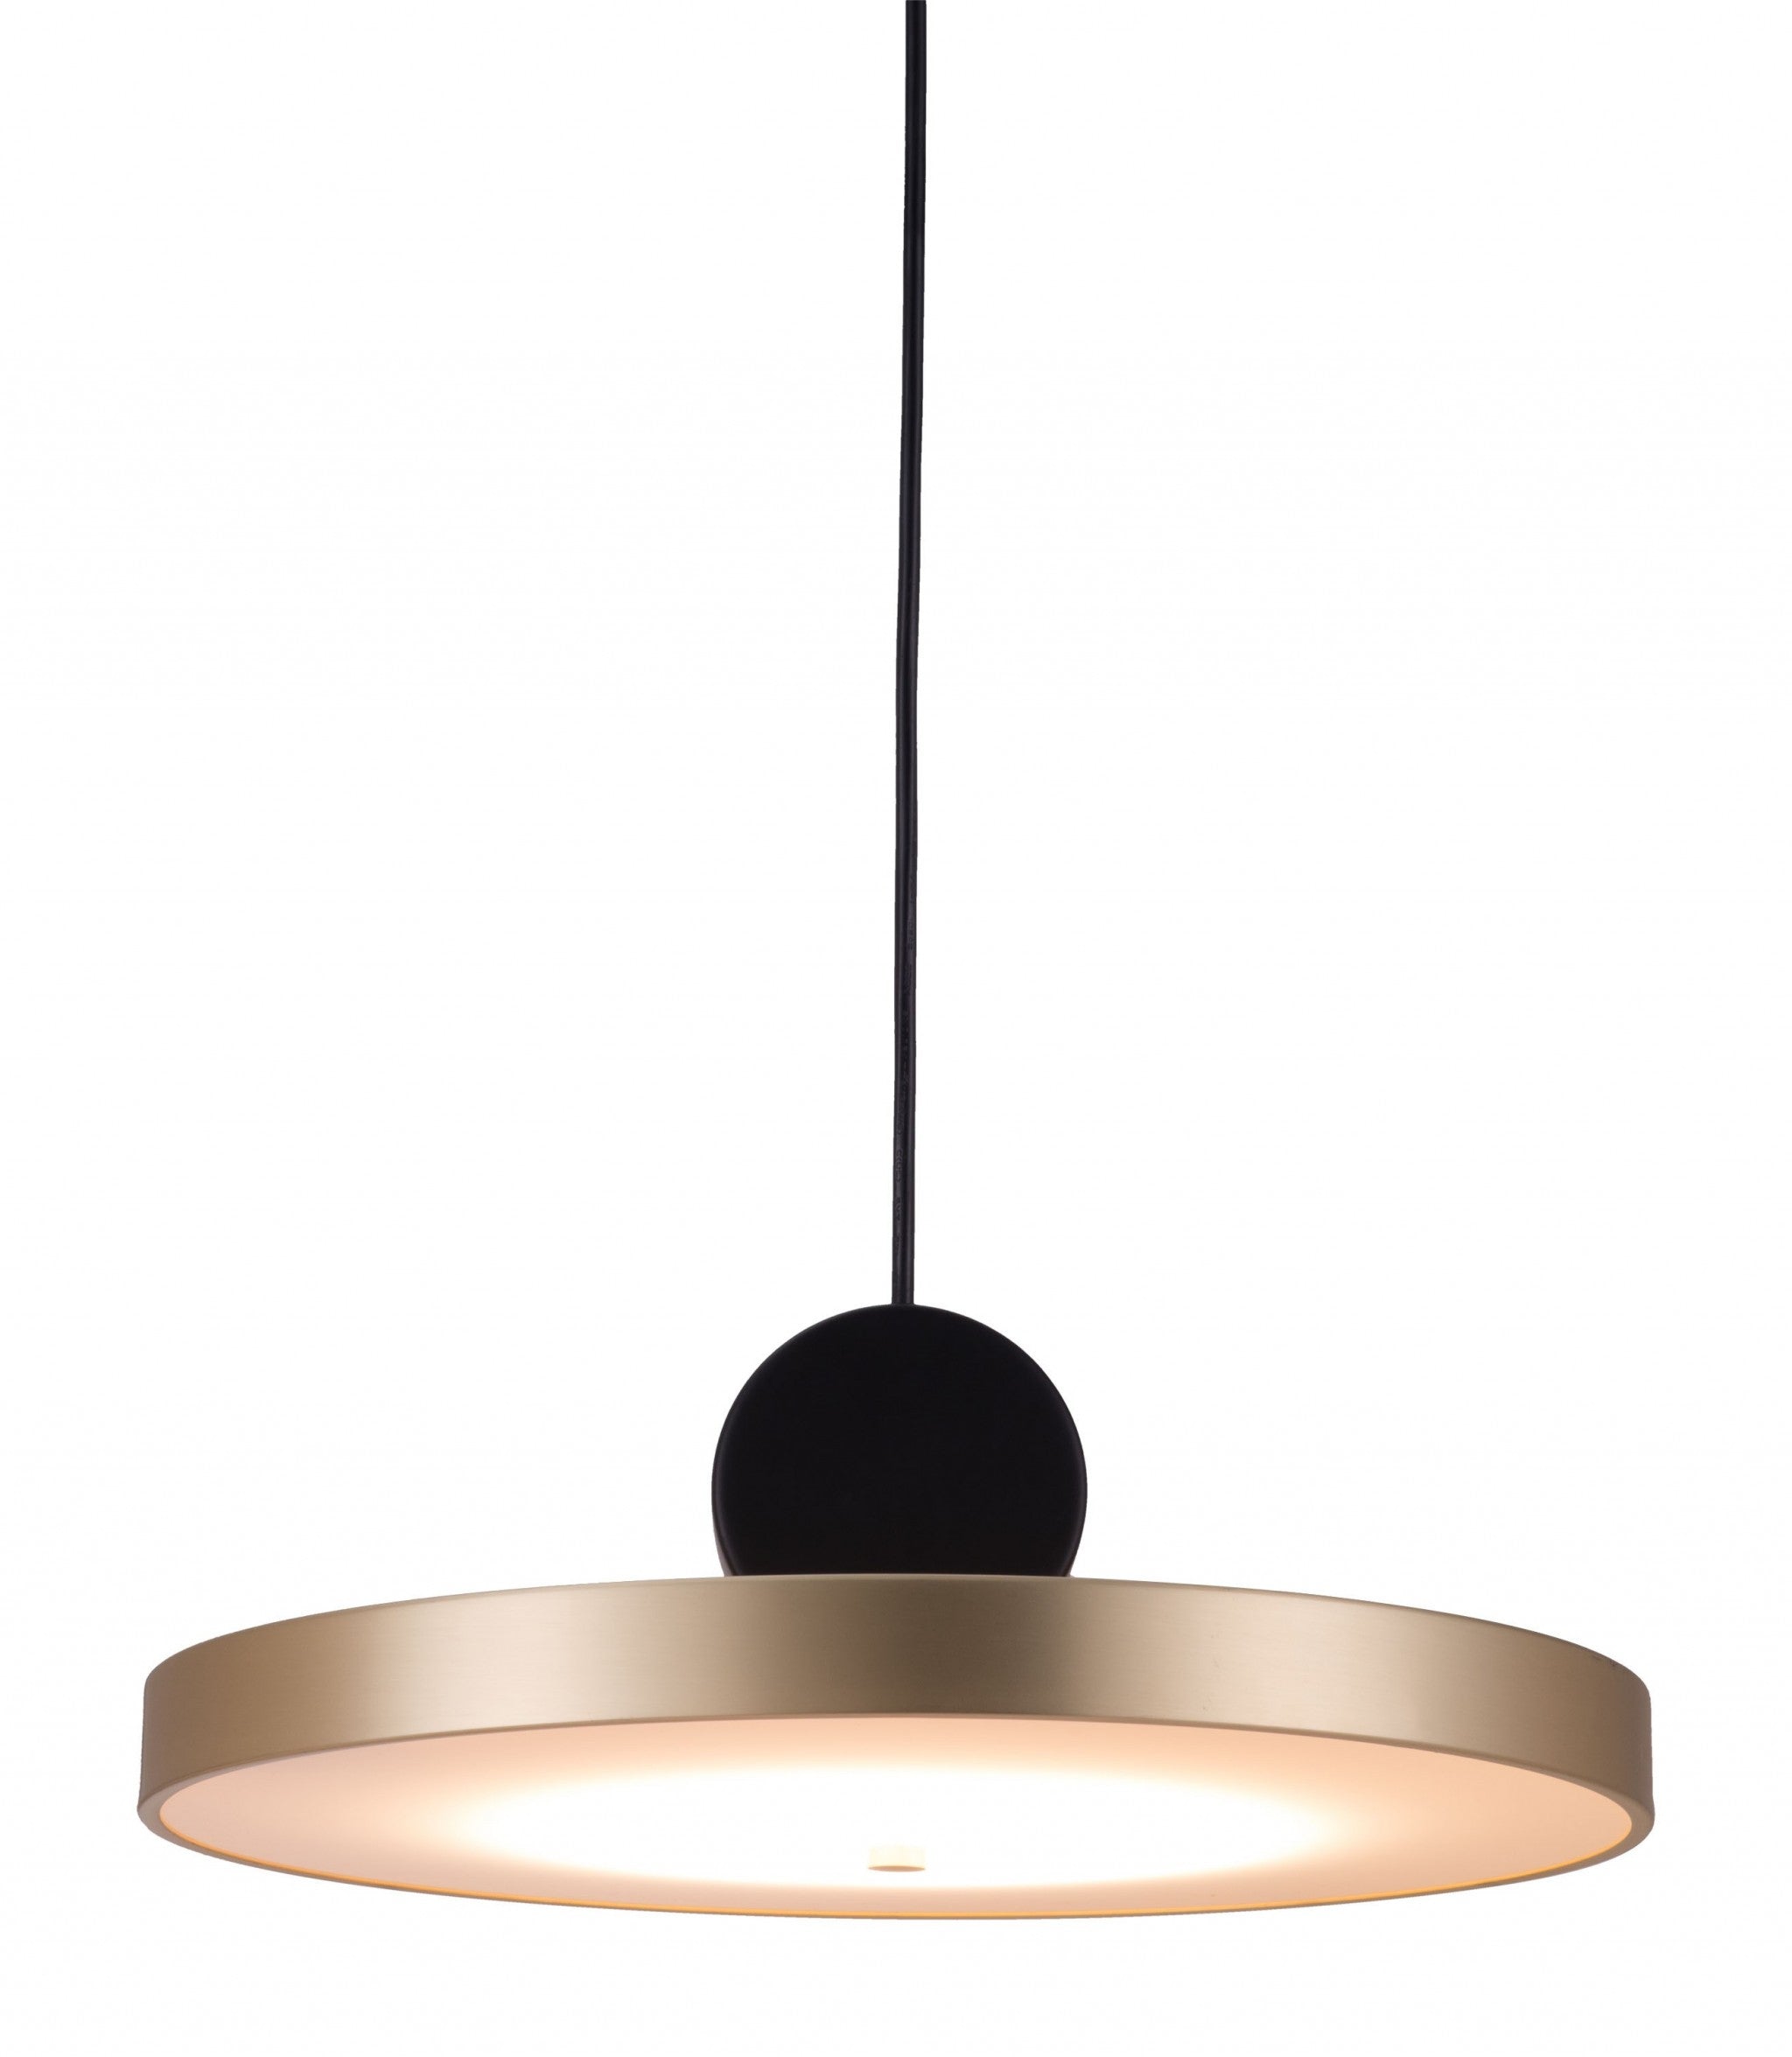 Gold and Black Flat Shaded Metal LED Dimmable Ceiling Light